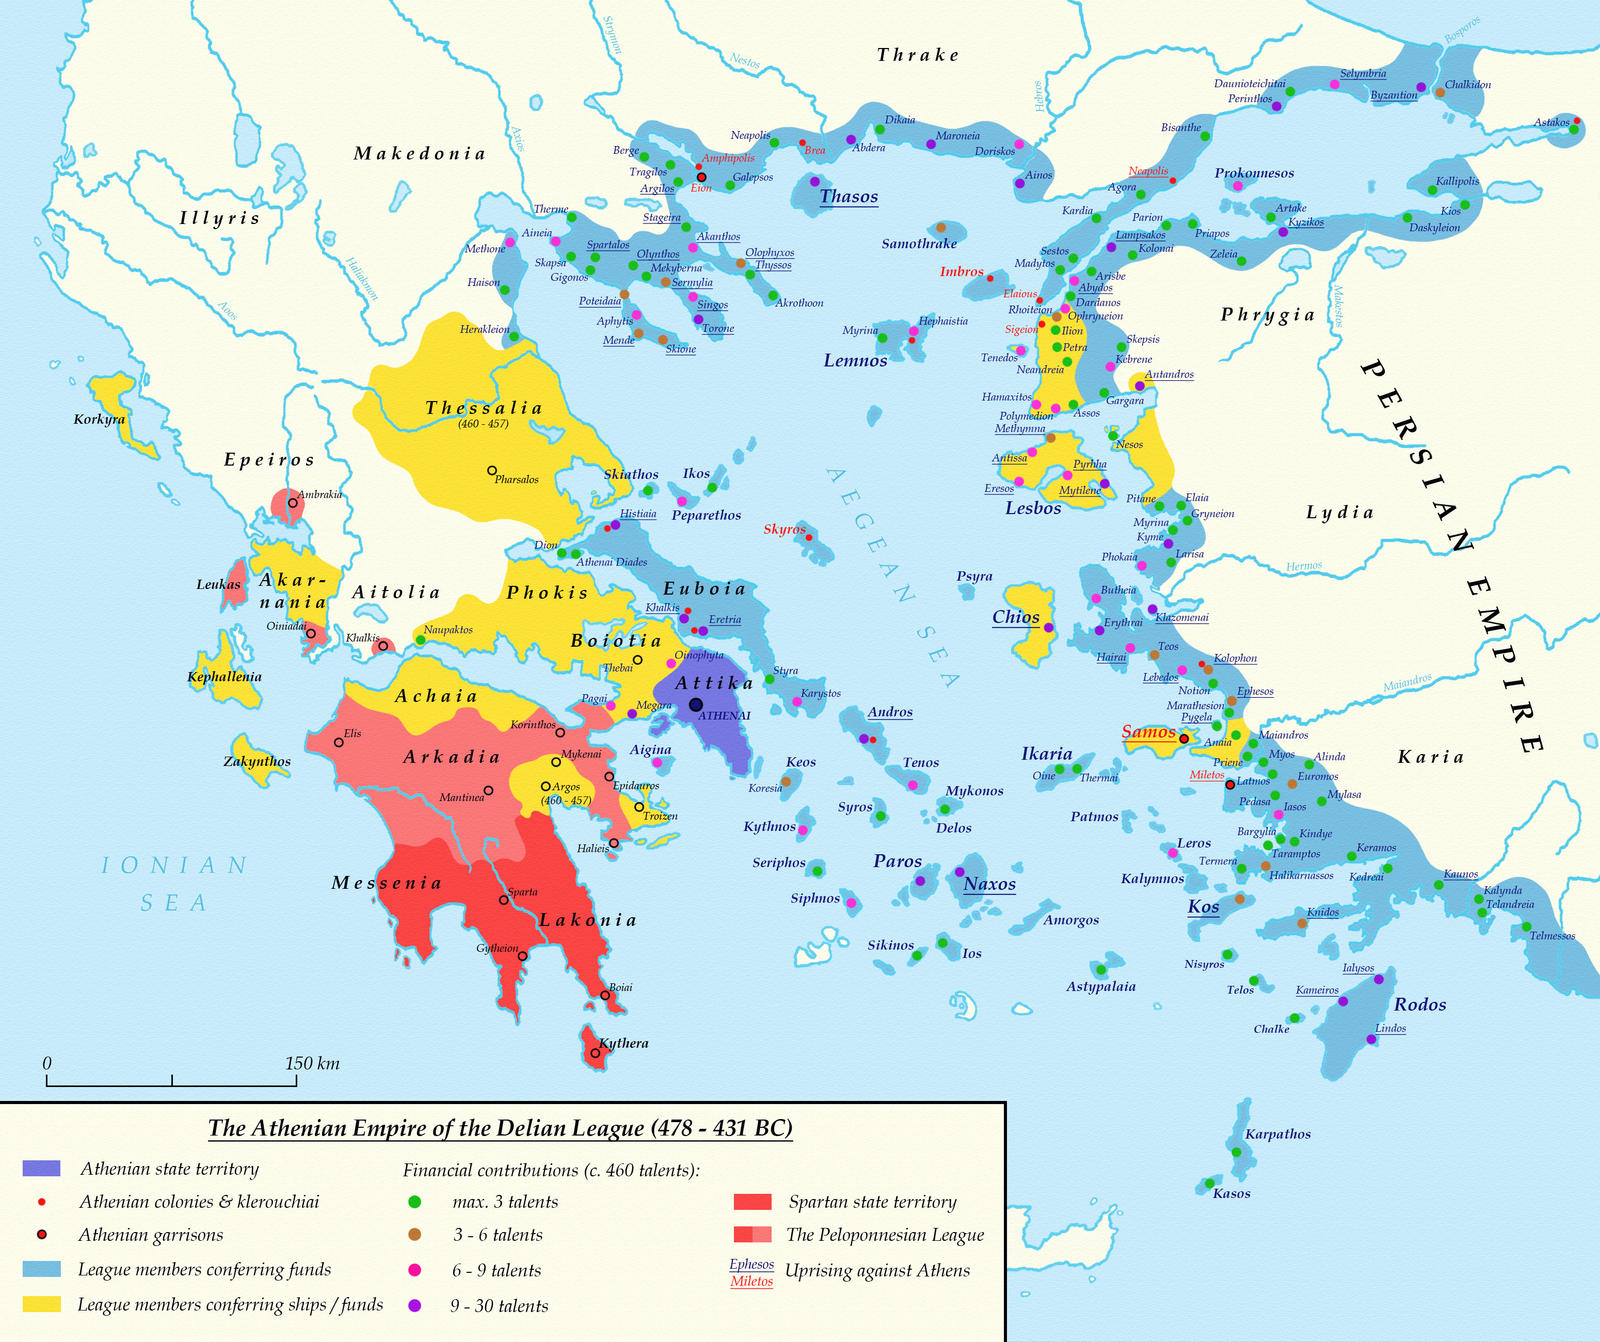 Image result for the athenian empire of the delian league